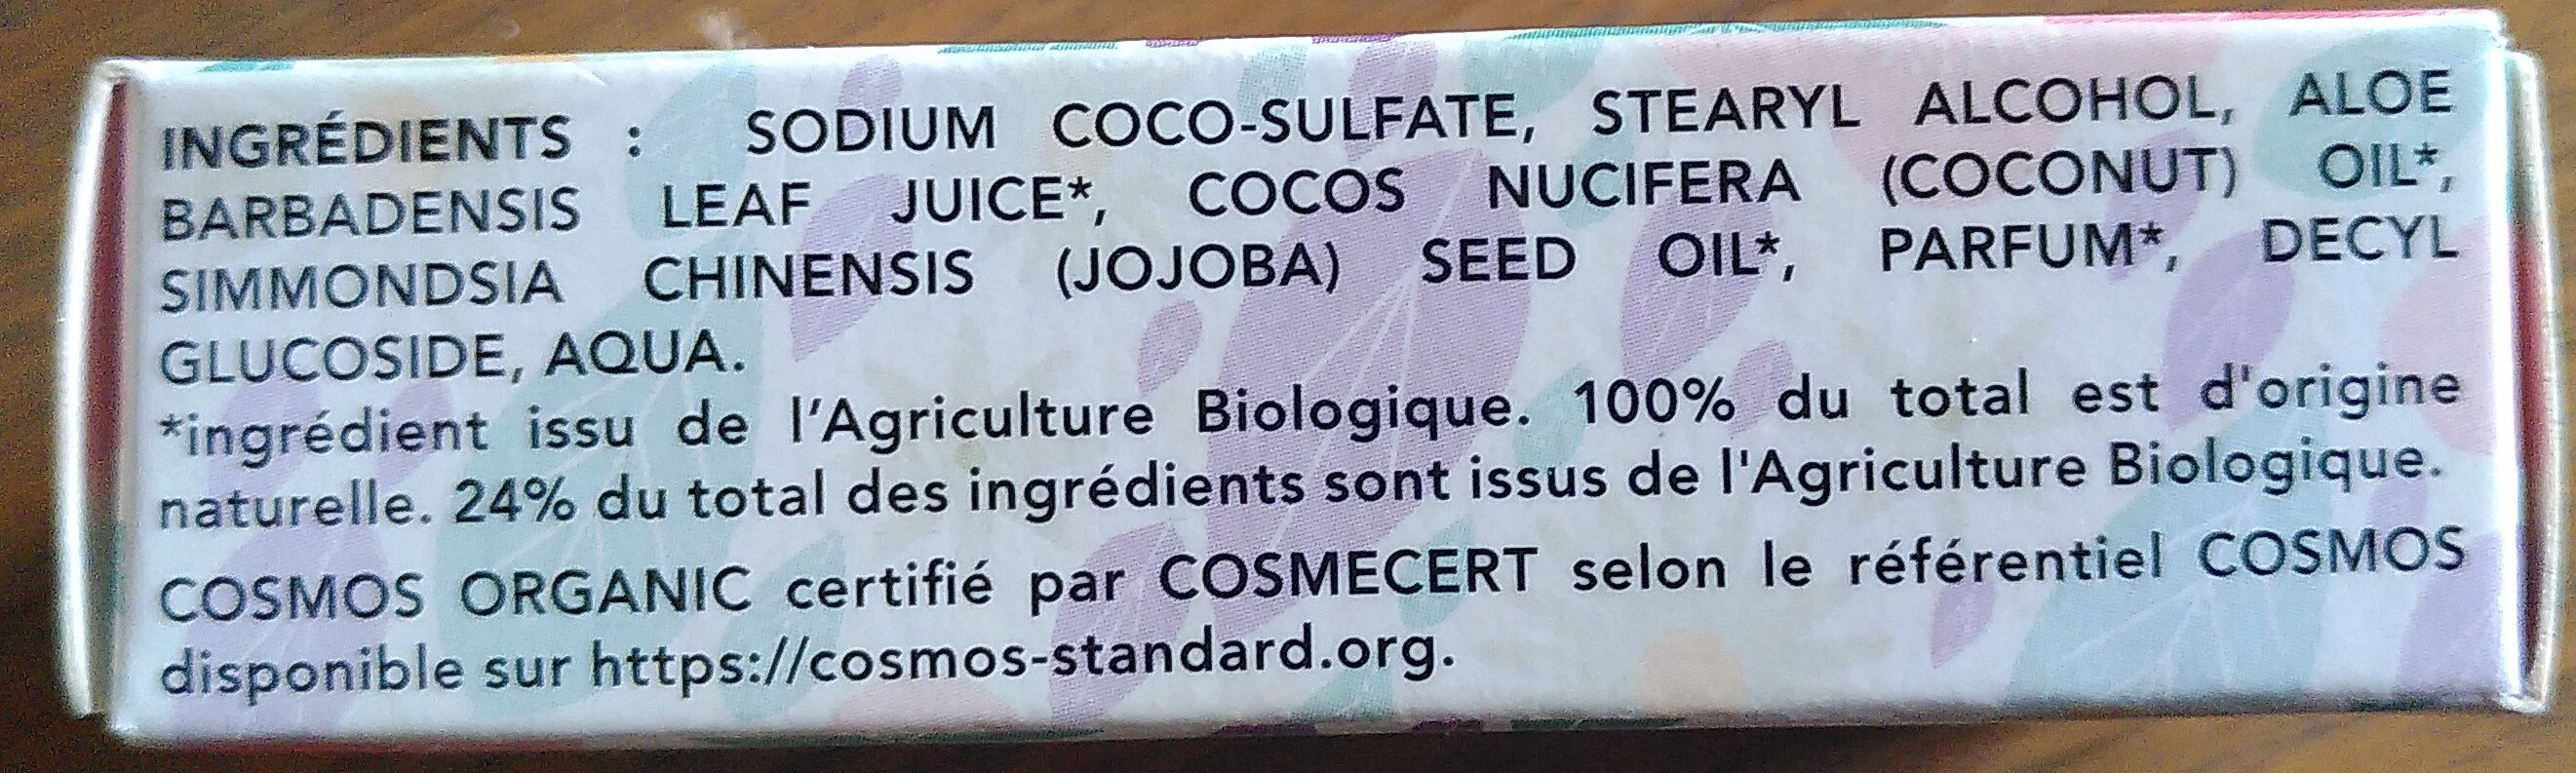 Shampoing solide cheveux secs - Ingredients - fr